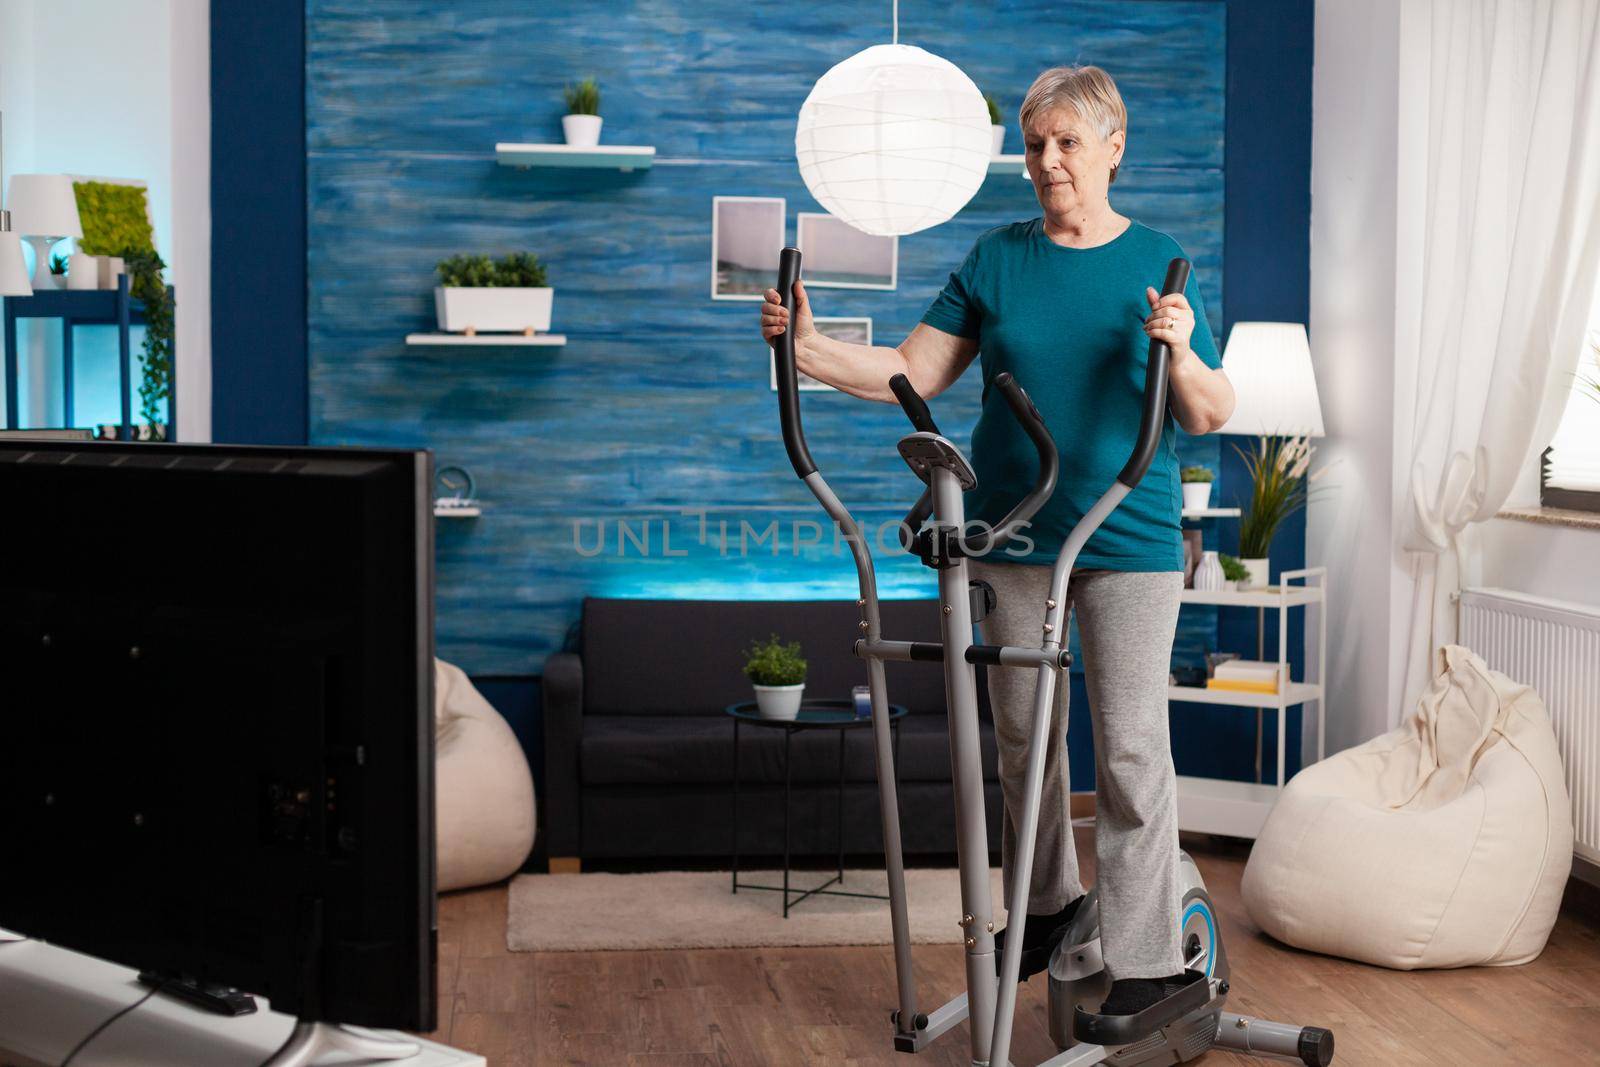 Invalid senior woman doing aerobics on cycling bike machine in living room for well being by DCStudio